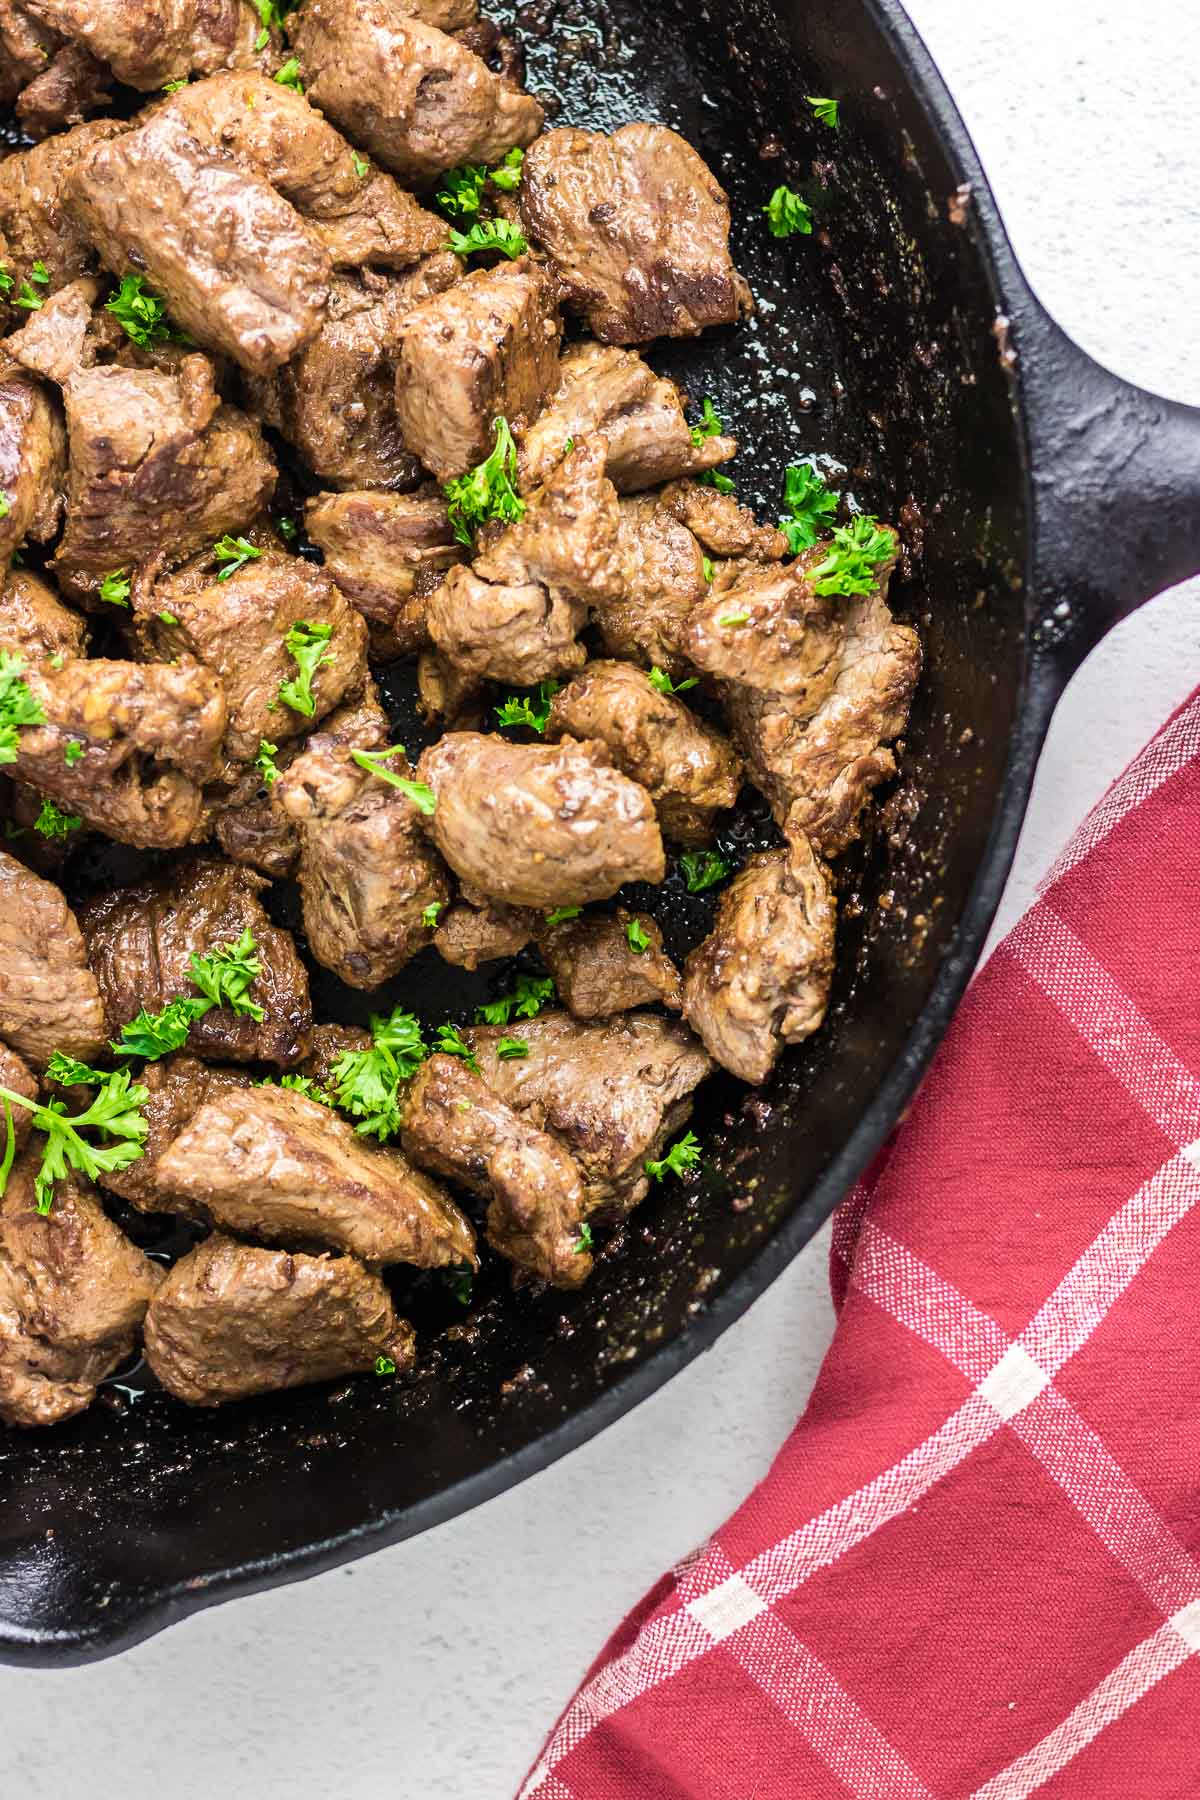 A skillet full of garlic butter steak tips with parsley sprinkled on top.